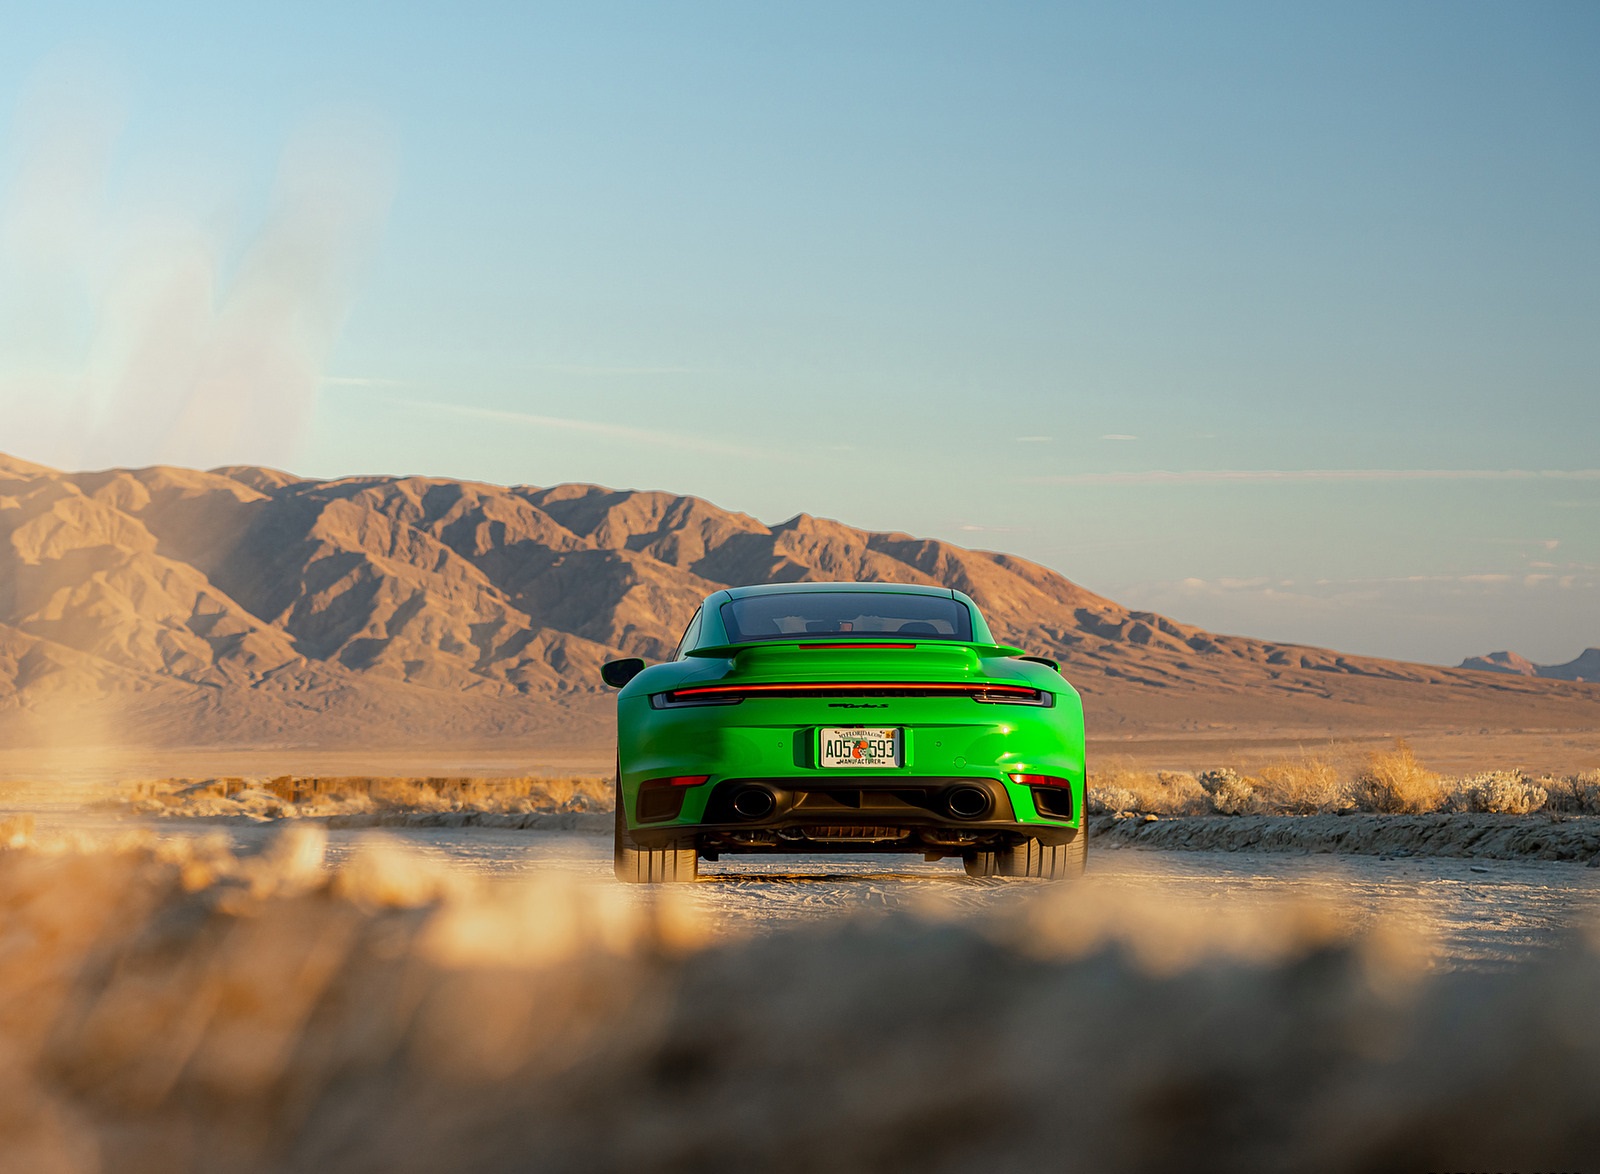 2021 Porsche 911 Turbo S Coupe (Color: Python Green) Rear Wallpapers  #14 of 254